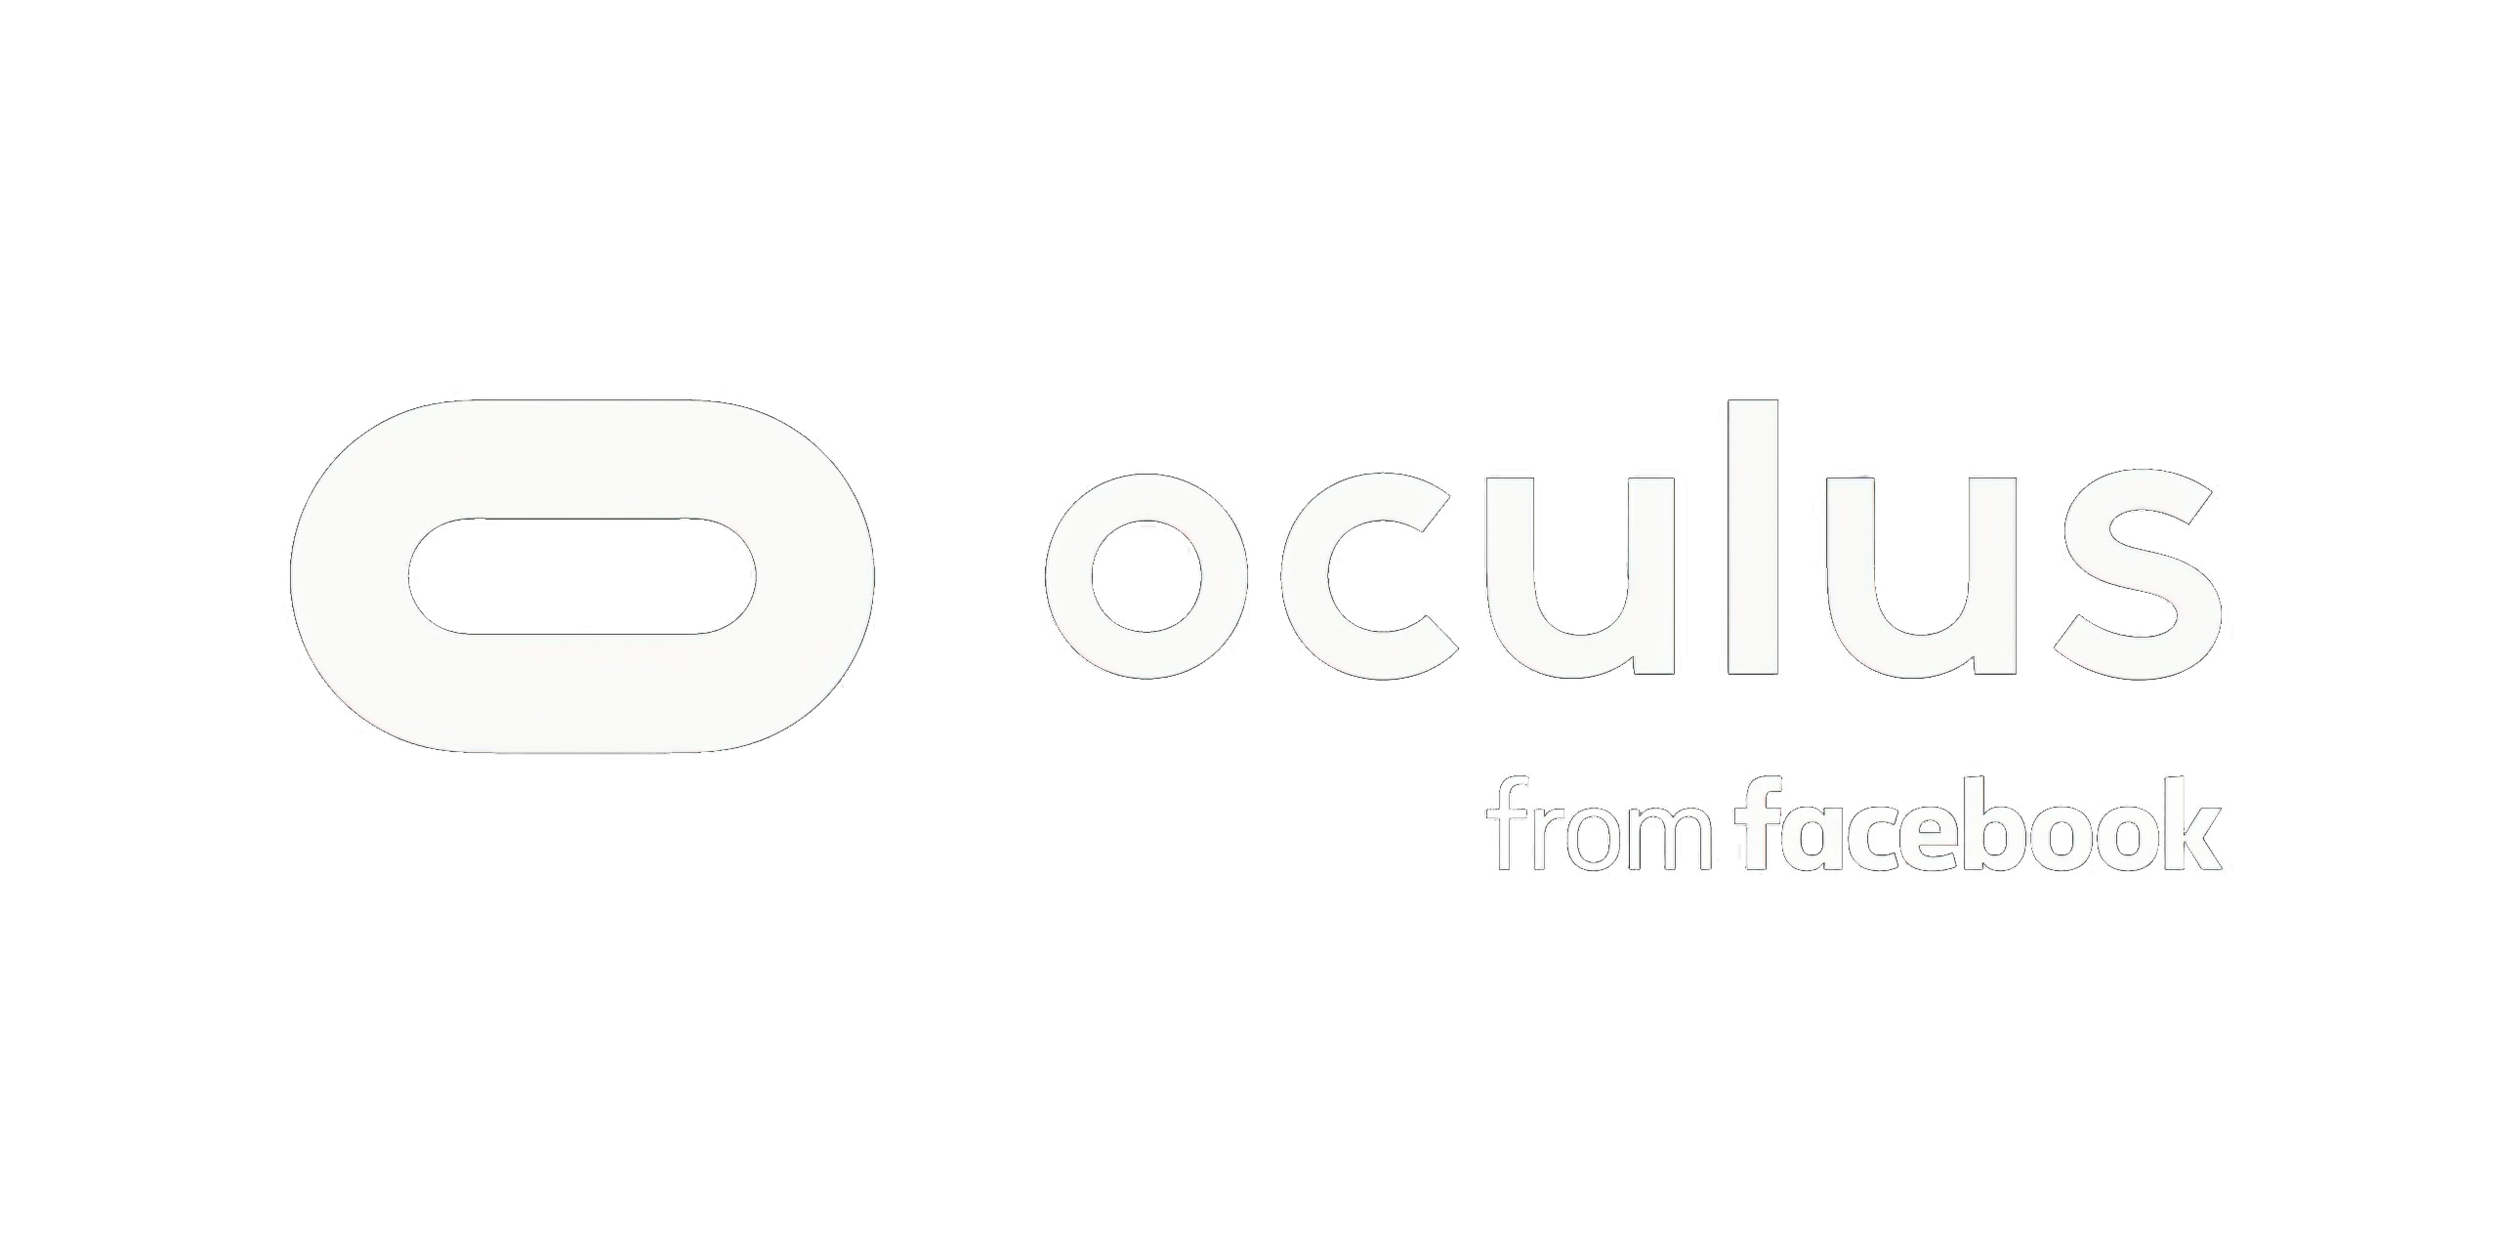 oculus from facebook (white on transparent).png